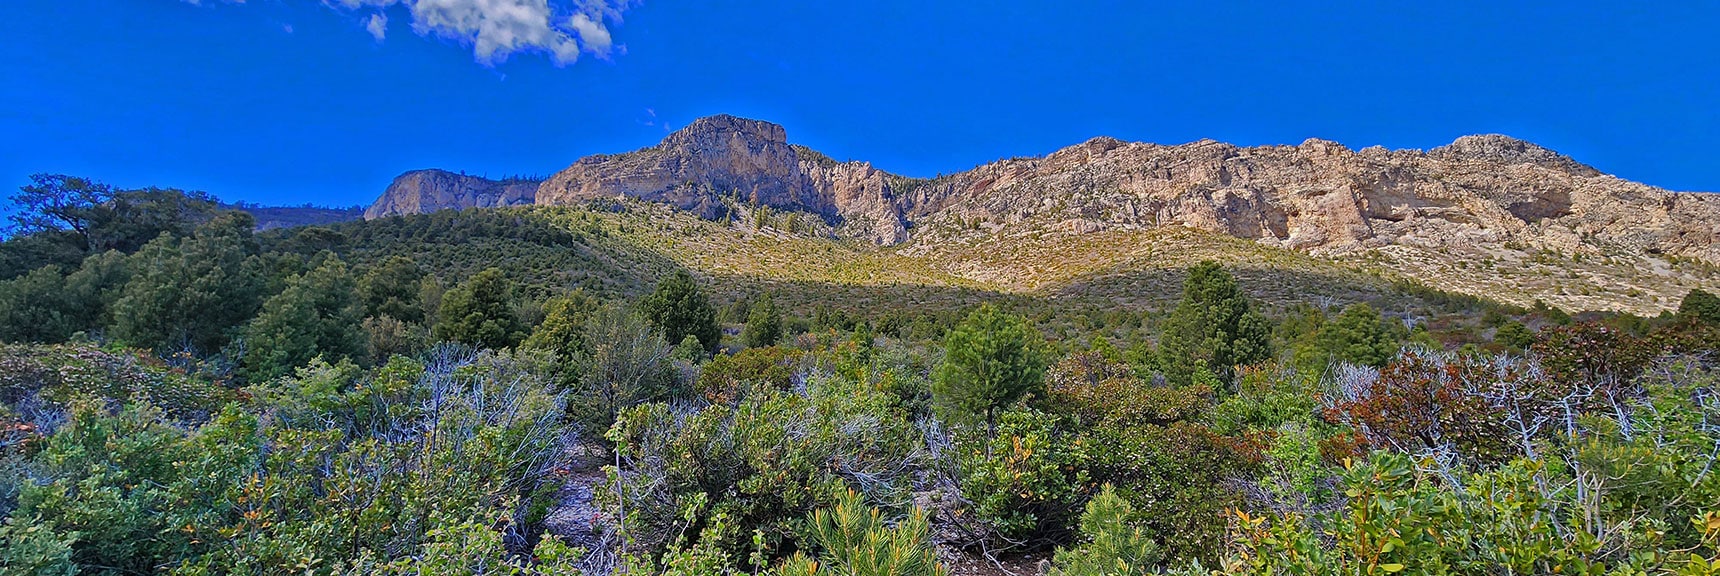 More Open View of Cliffs South of Fletcher Peak | Eagles Nest Loop | Mt Charleston Wilderness | Spring Mountains, Nevada